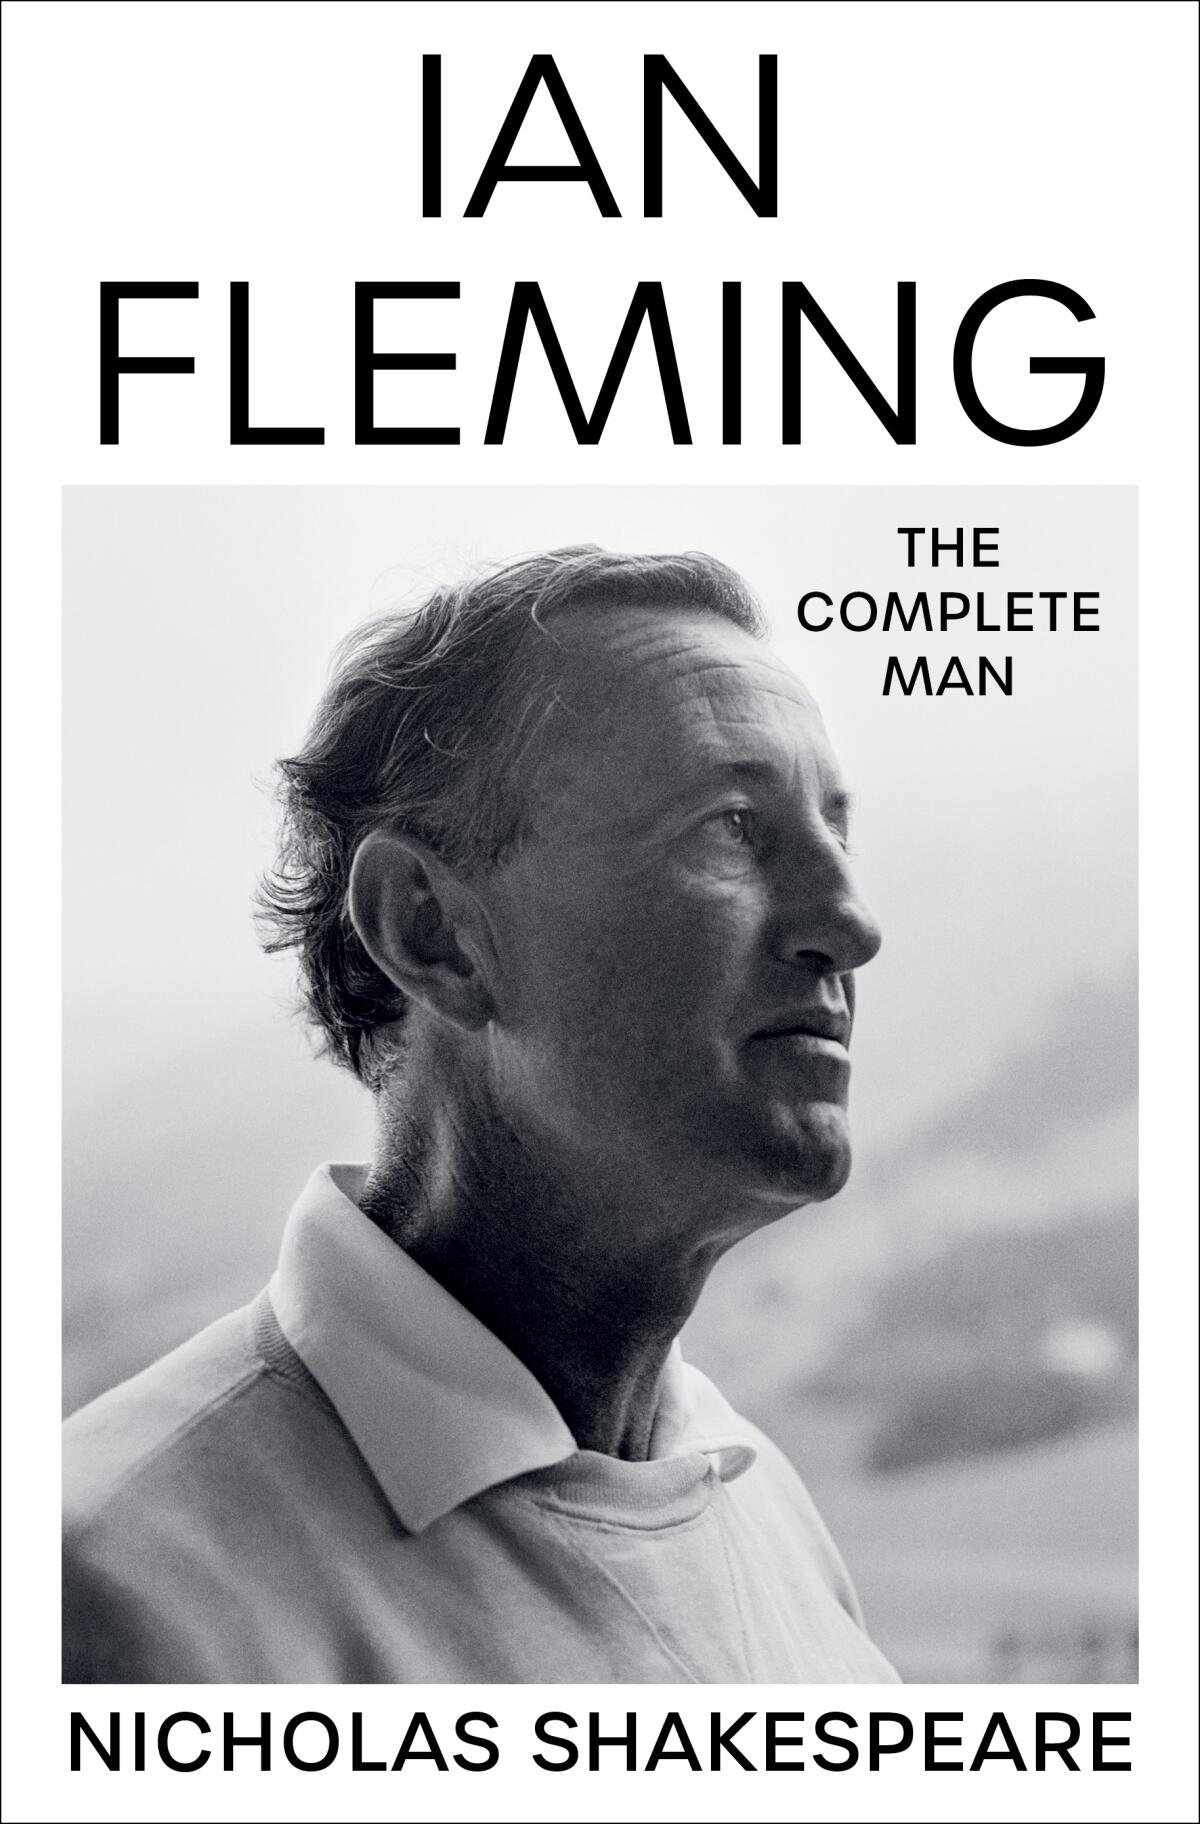 Cover of the book "Ian Fleming" with a black-and-white photo of its subject